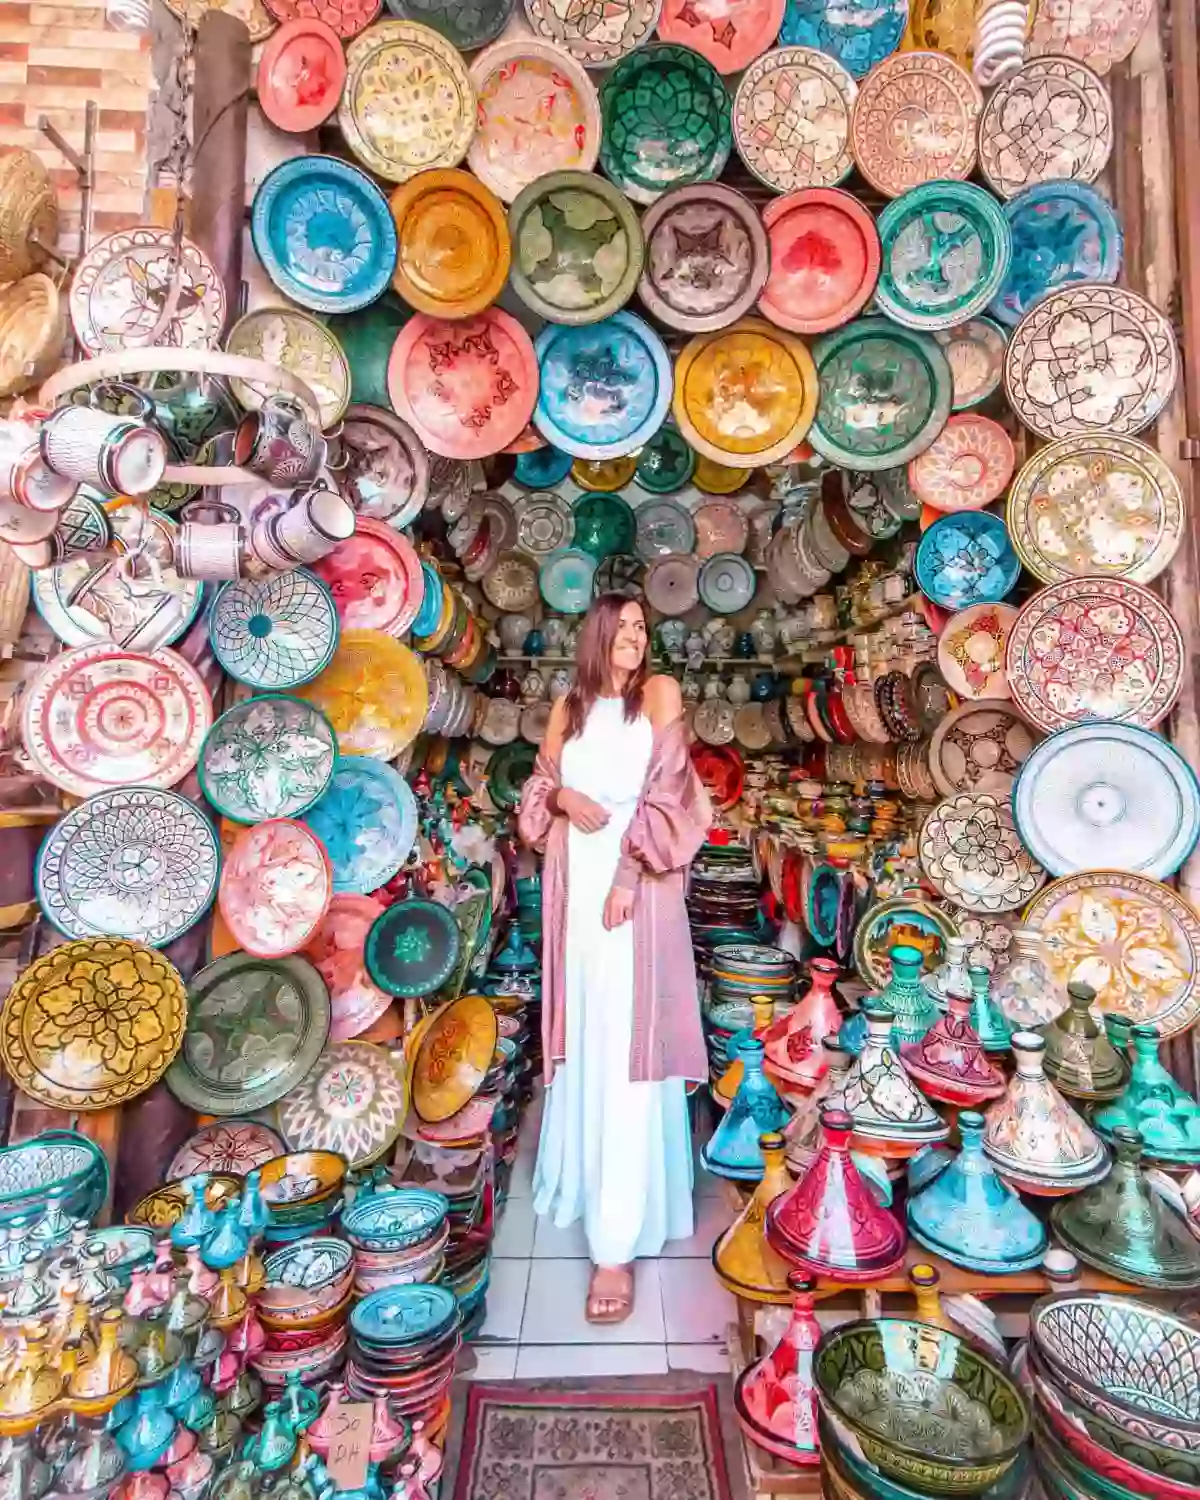 Great tips for shopping in Morocco